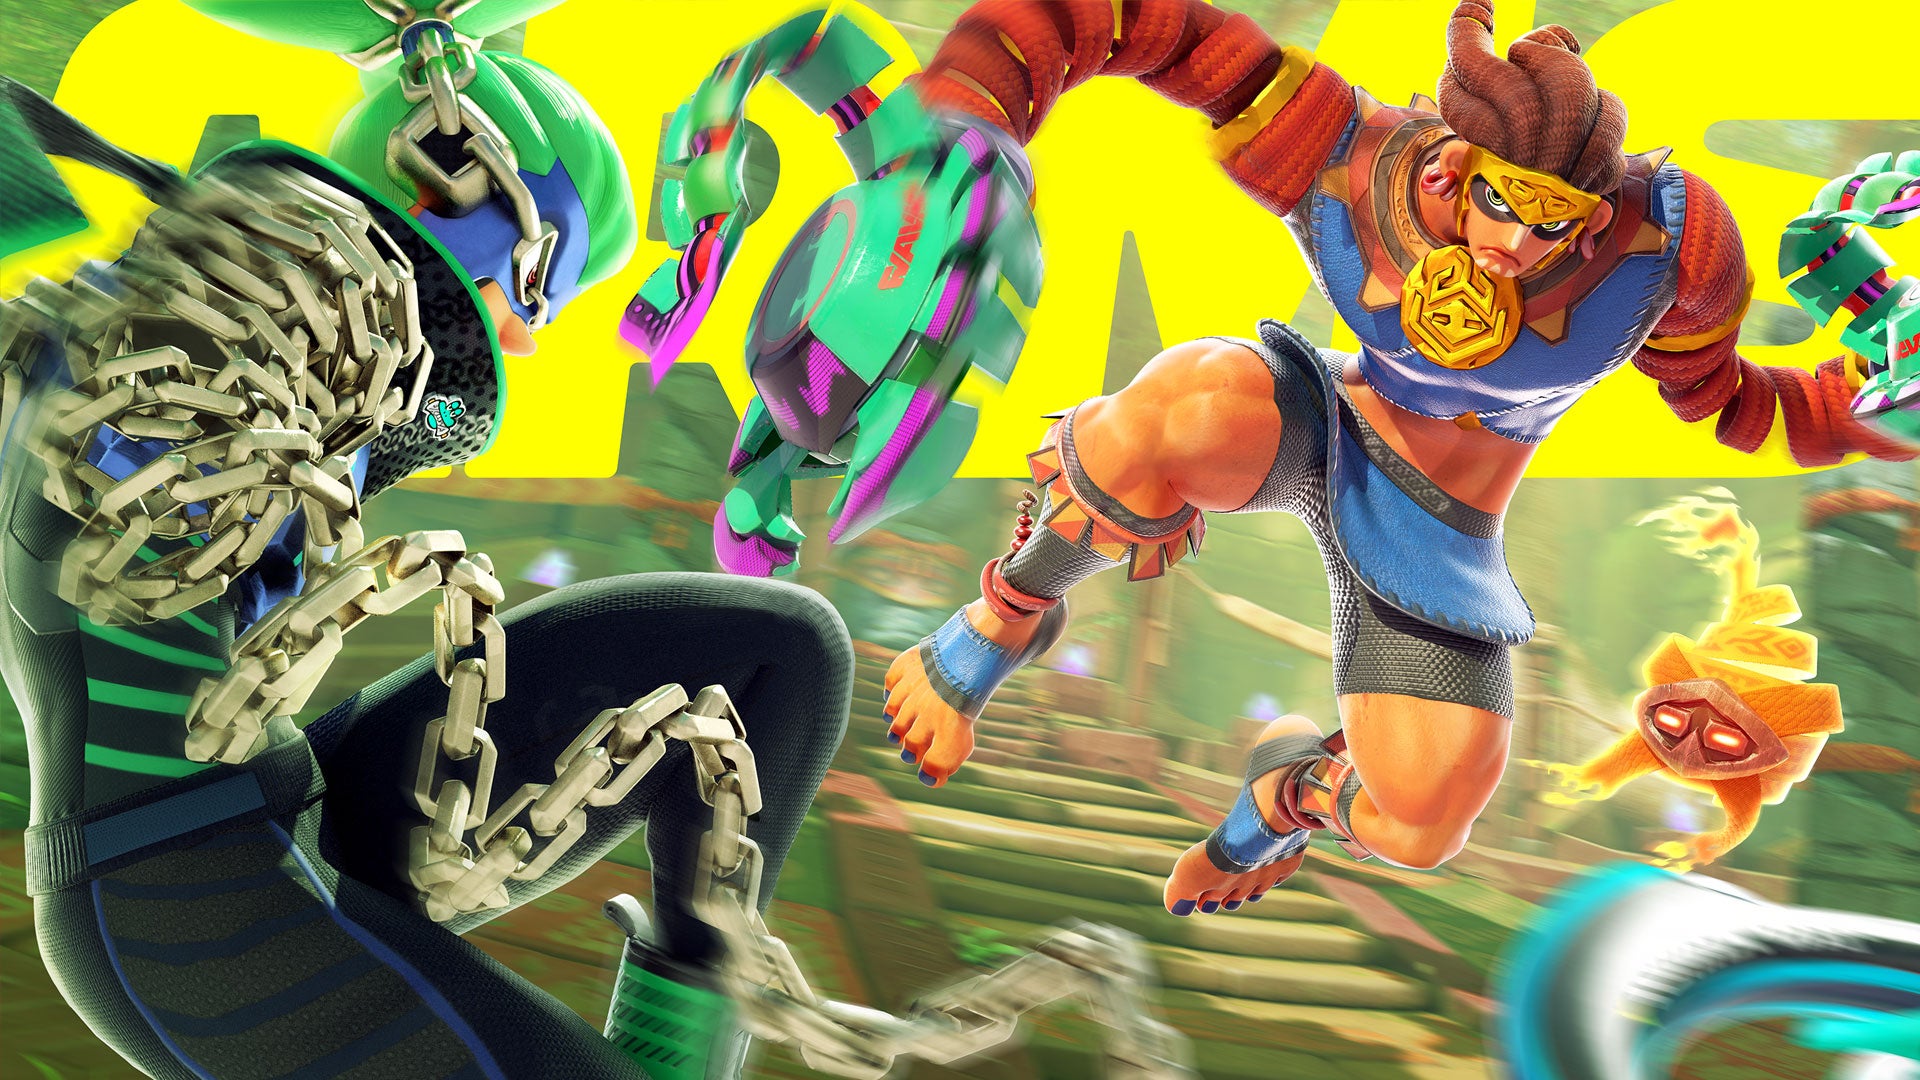 Image for Arms continues to stretch out with a new fighter and stage for its 4.0 update